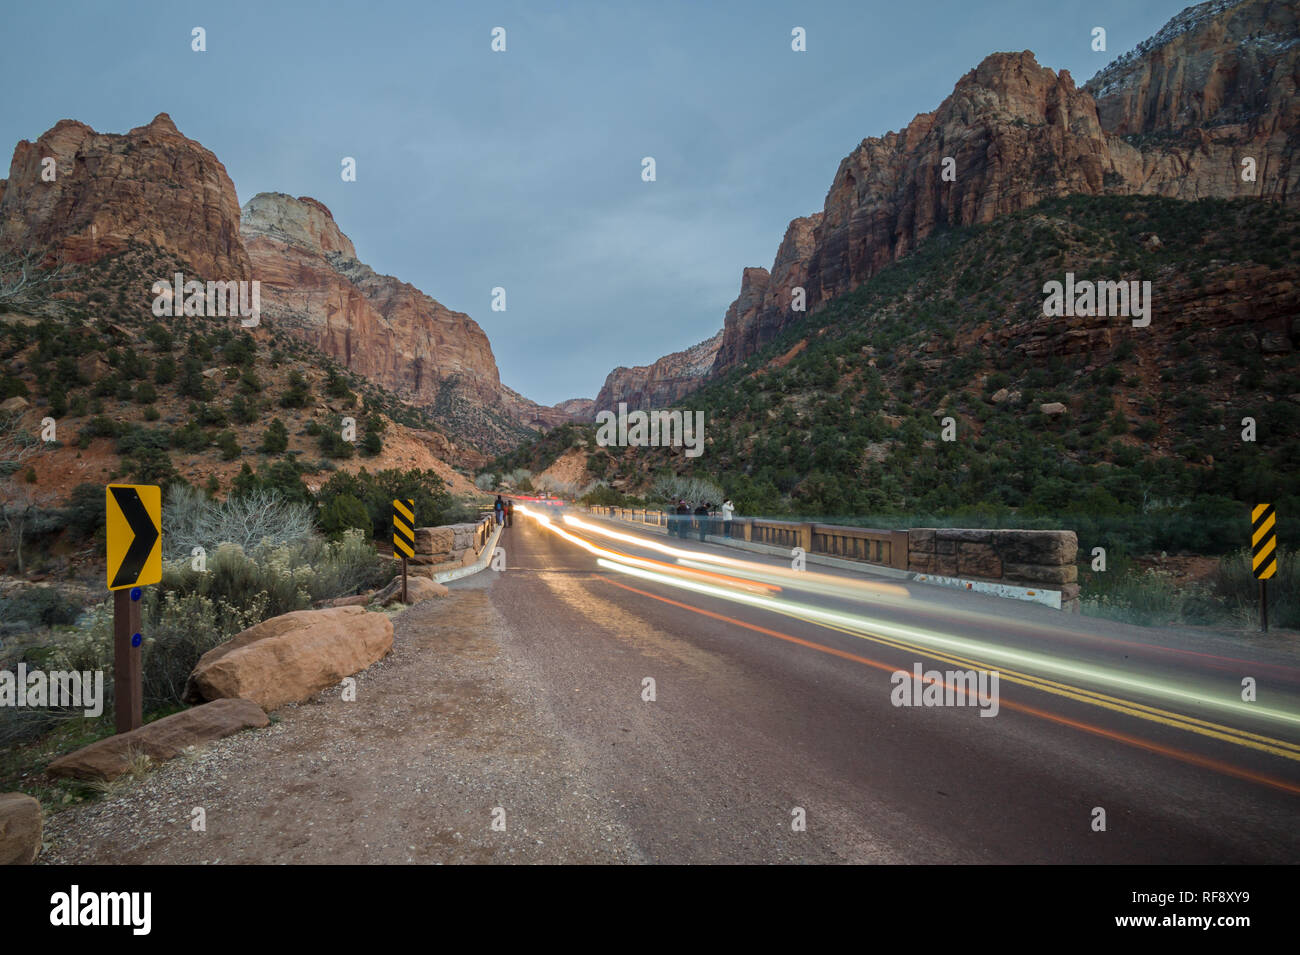 A scenic drive through Zion Canyon lets visitors explore Zion National Park near Springdale, Utah by vehicle; stops along the road lead to short hikes Stock Photo